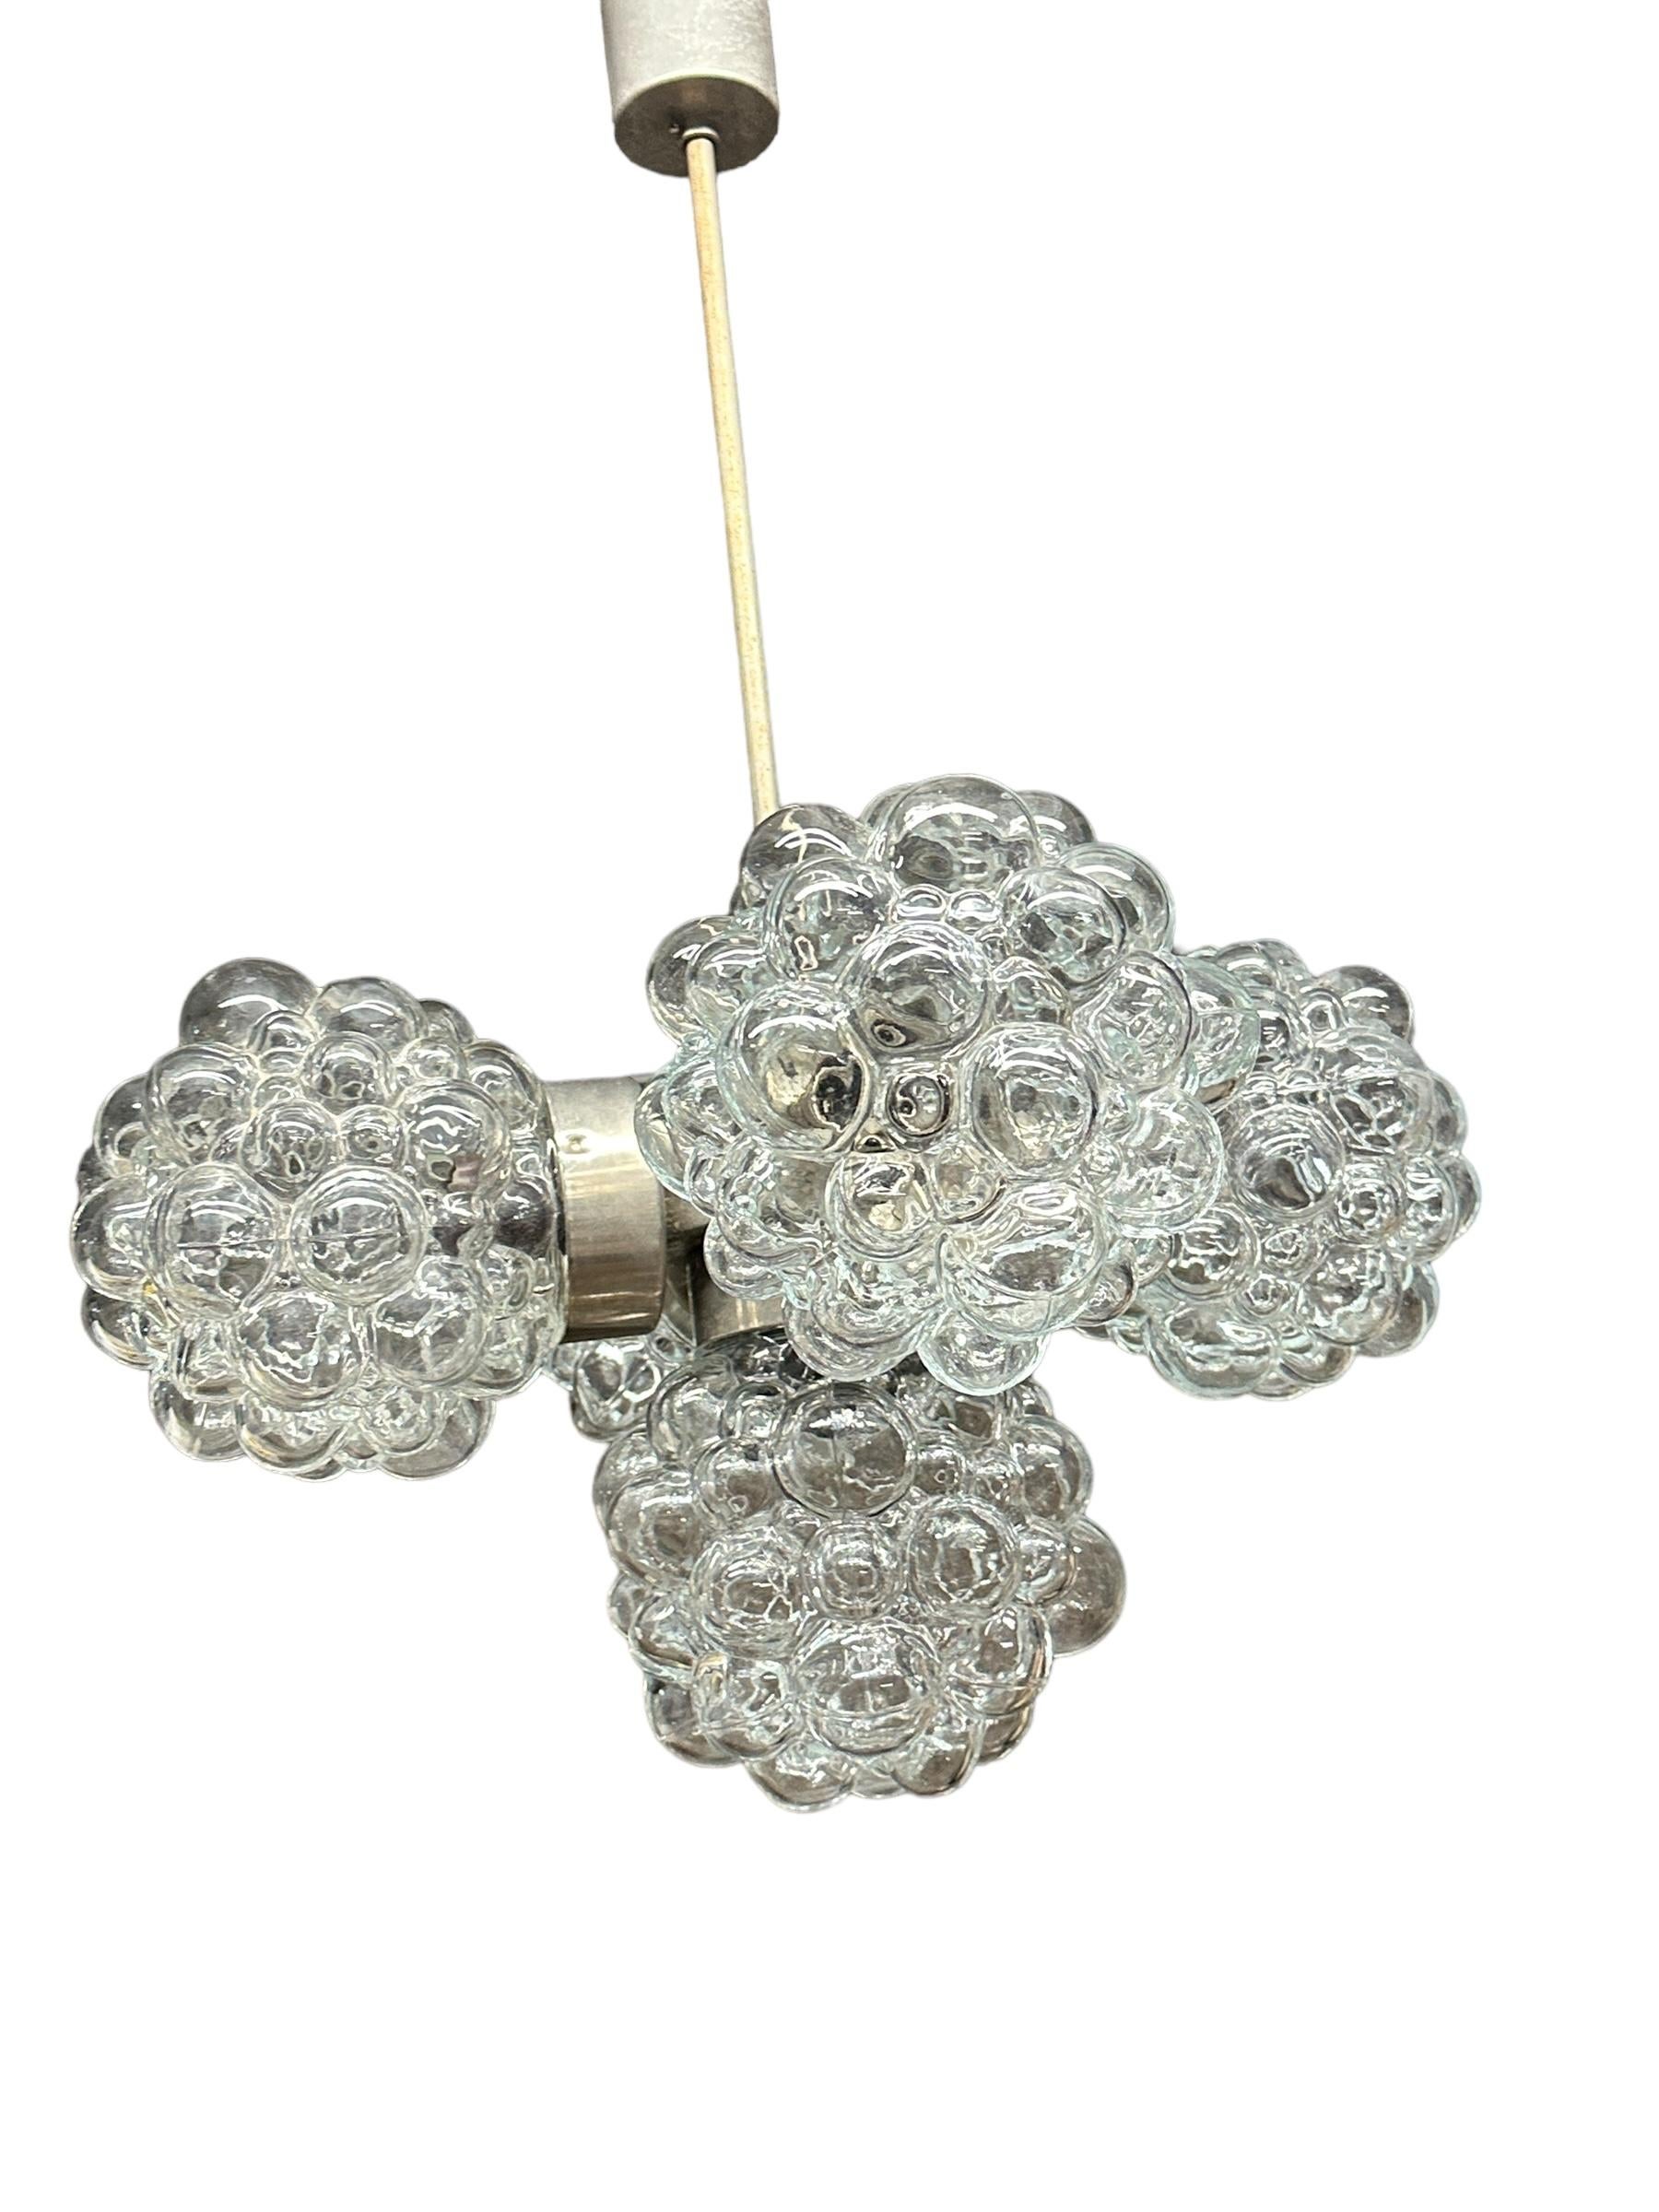 Metal 5 Light Bubble Glass Helena Tynell Style Chandelier, Austria 1960s For Sale